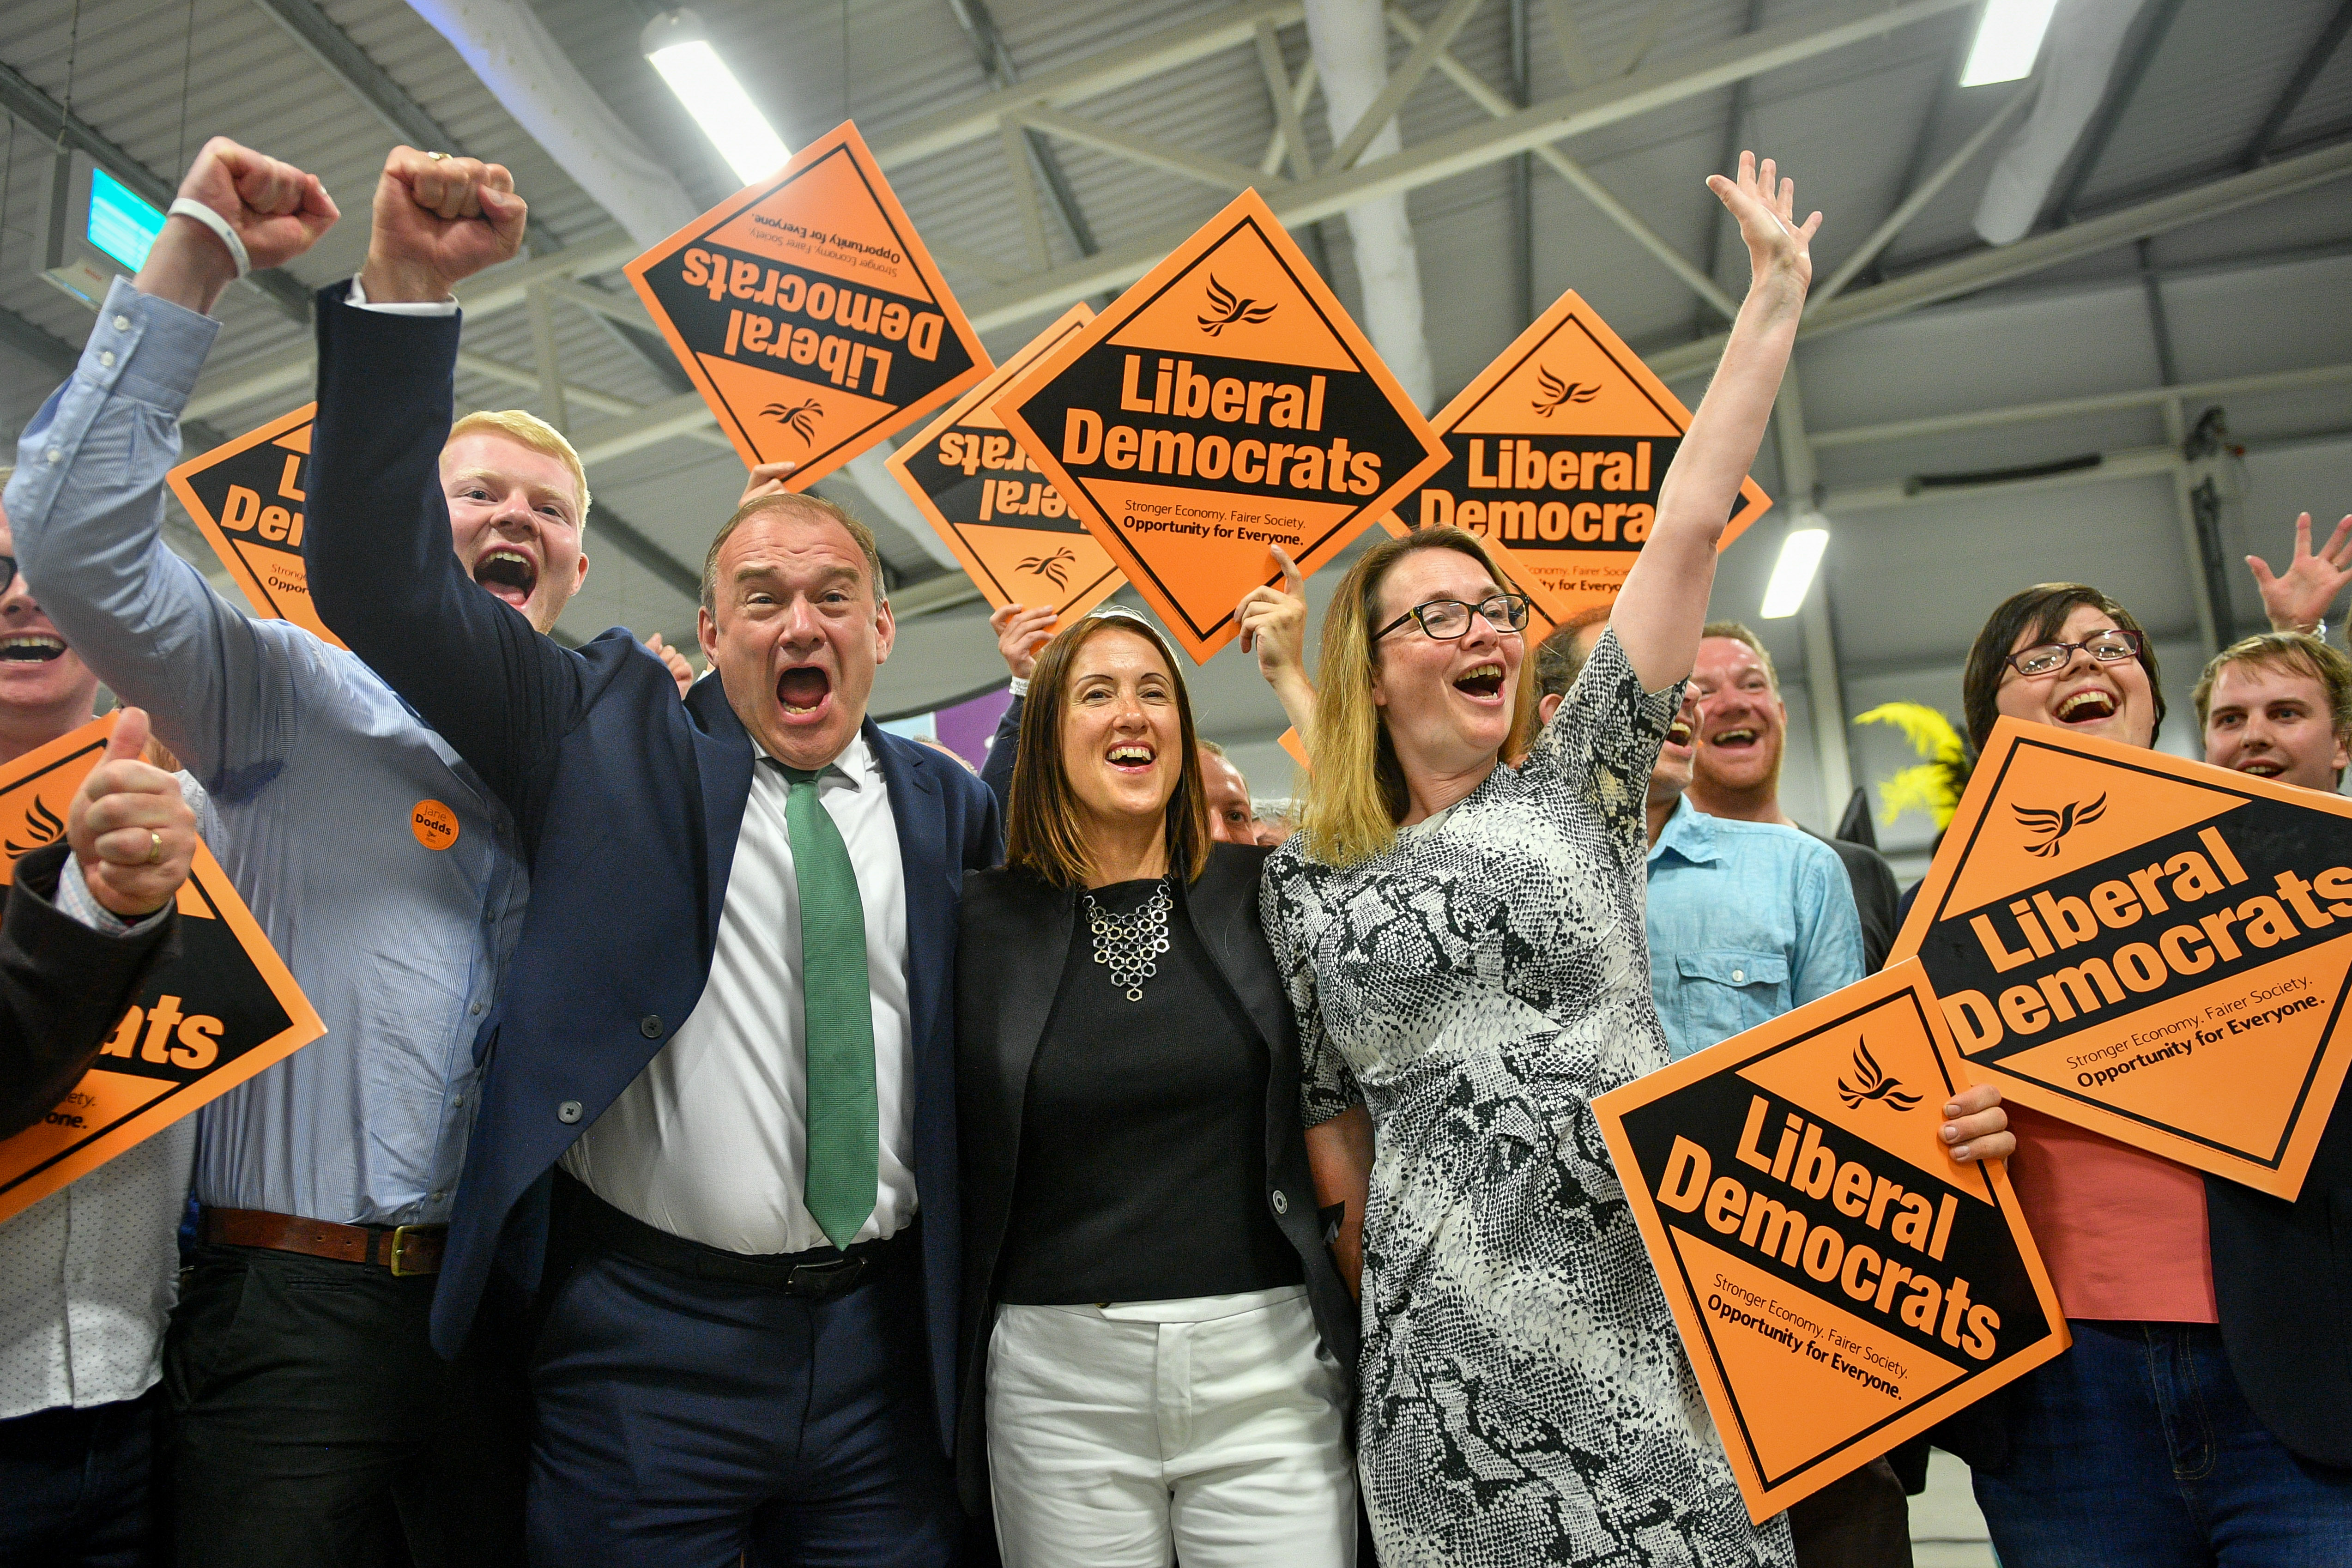 Liberal Democrat MP Jane Dodds, centre, celebrates with supporters as she wins the seat